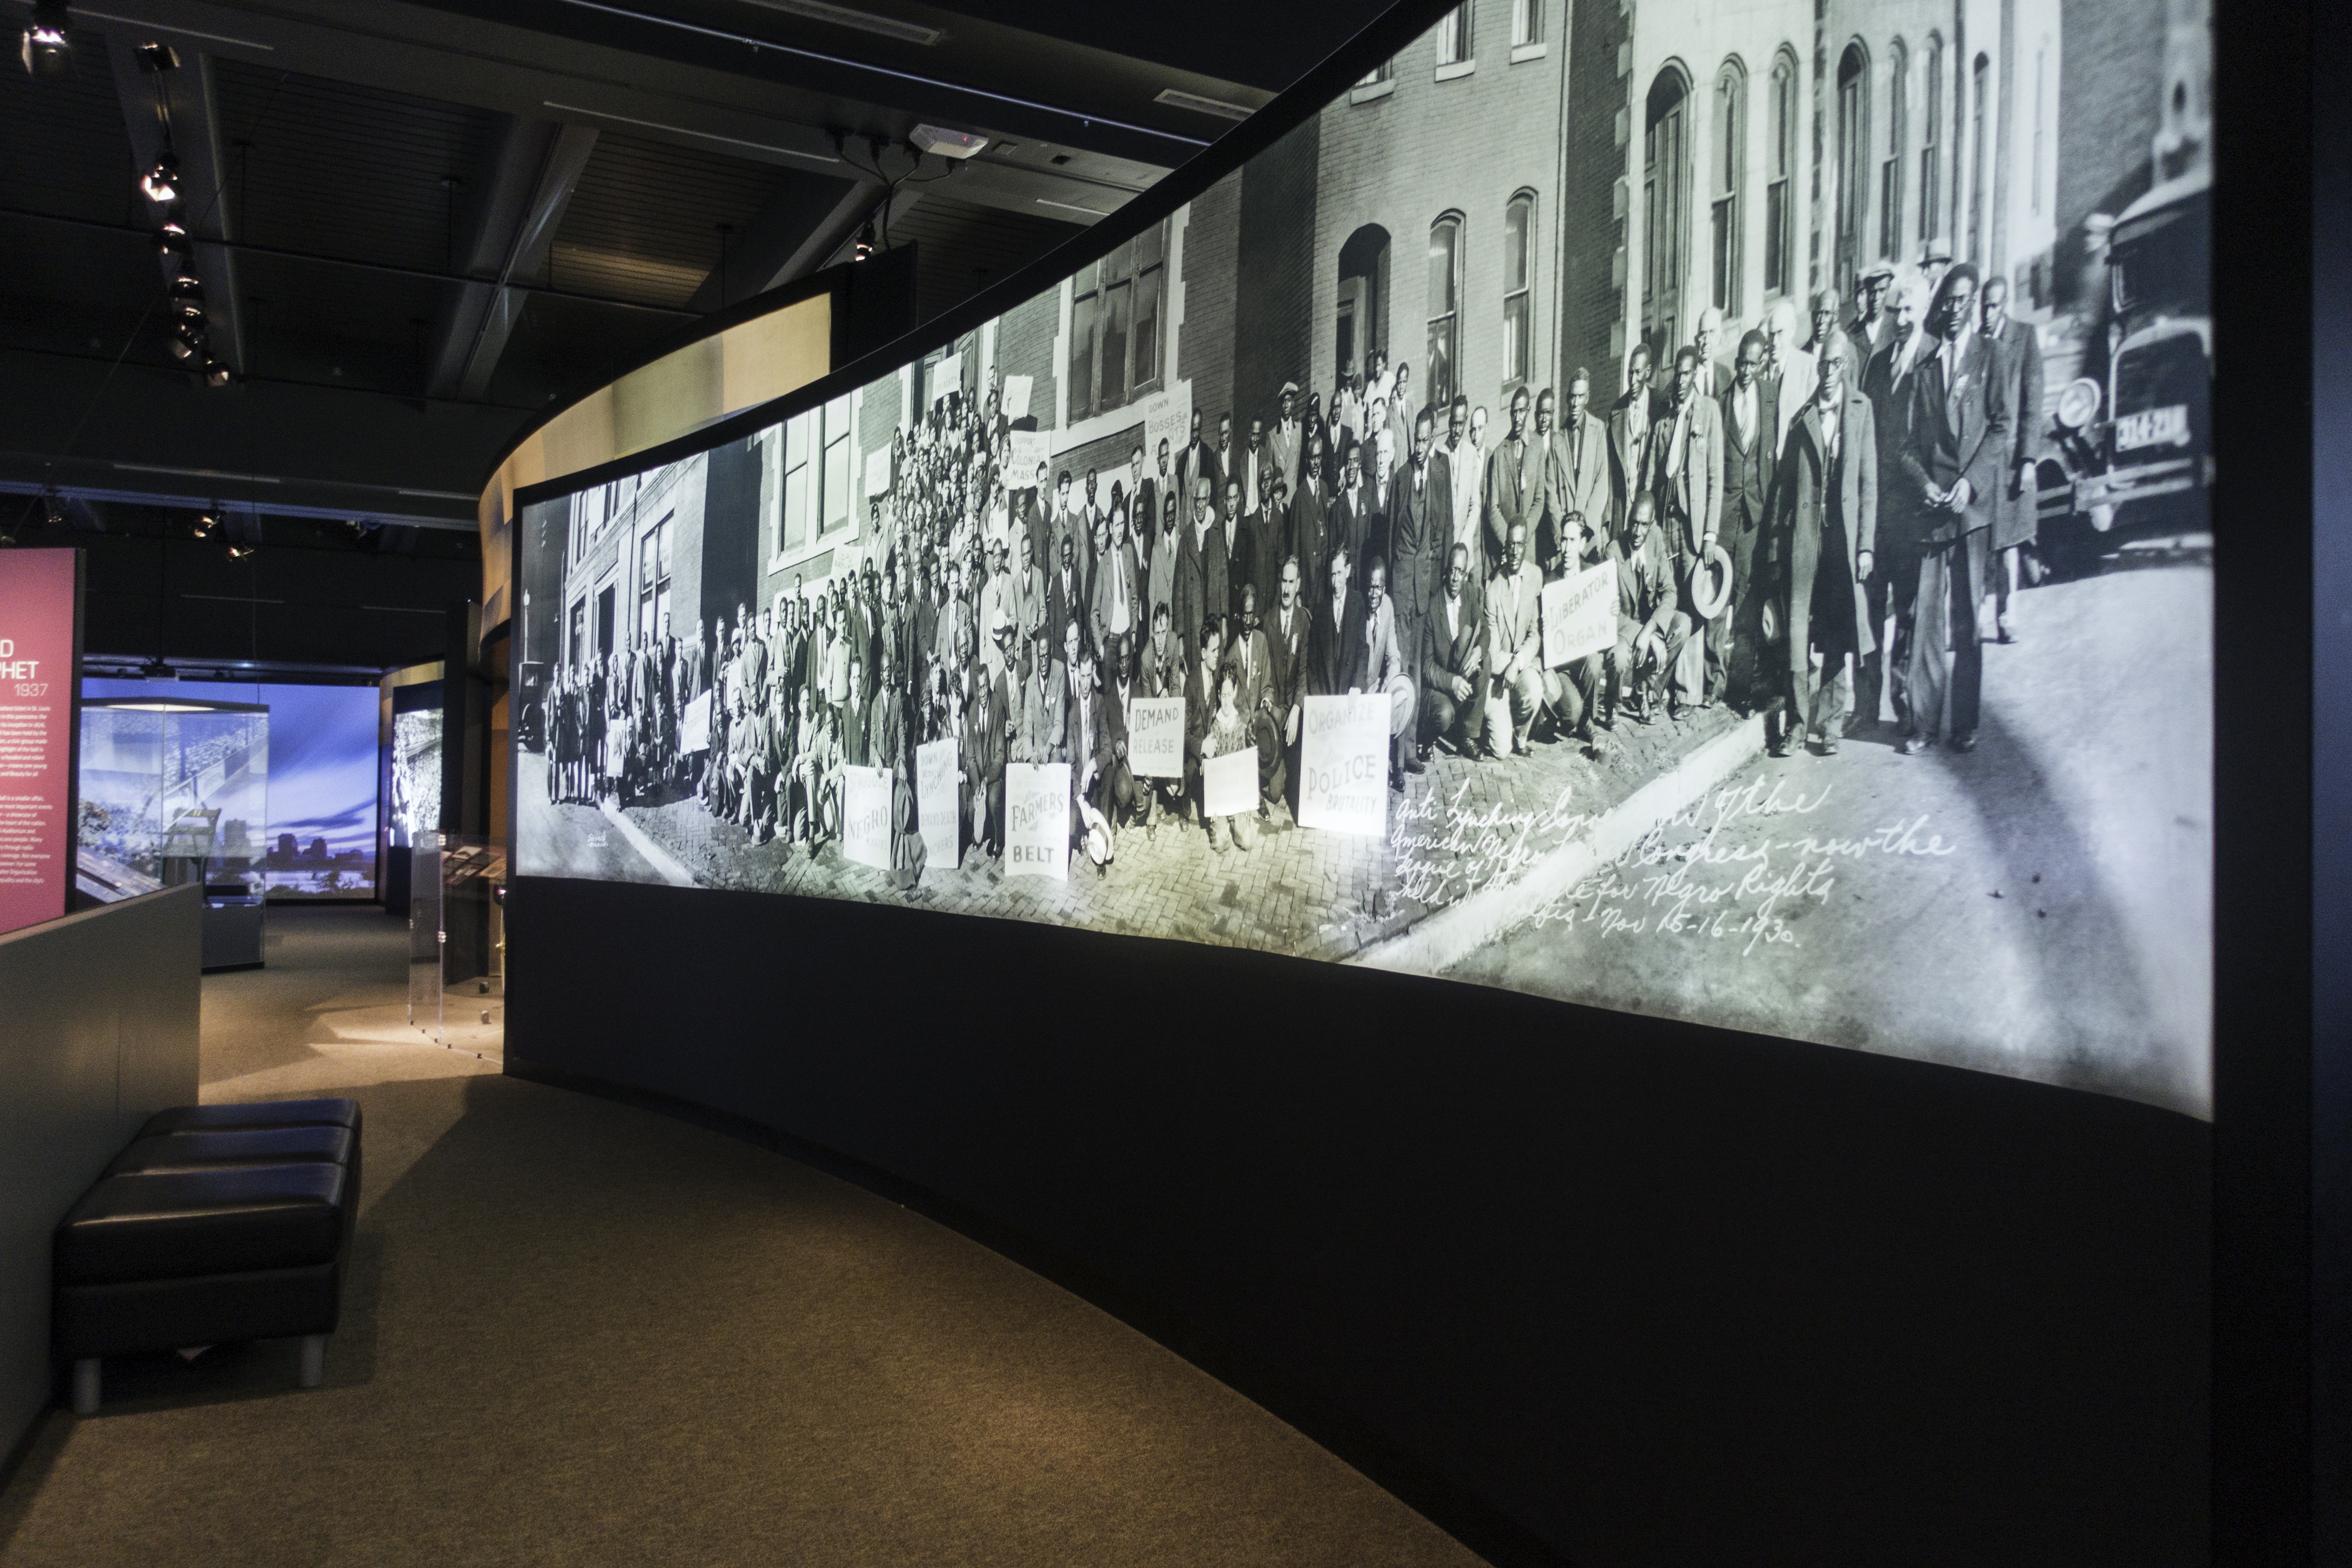 The Panoramas Exhibit at the Missouri History Museum in Forest Park in St. Louis, Missouri.  These large, black and white, rear-projected images are recreations of historic events as told in panoramic photos